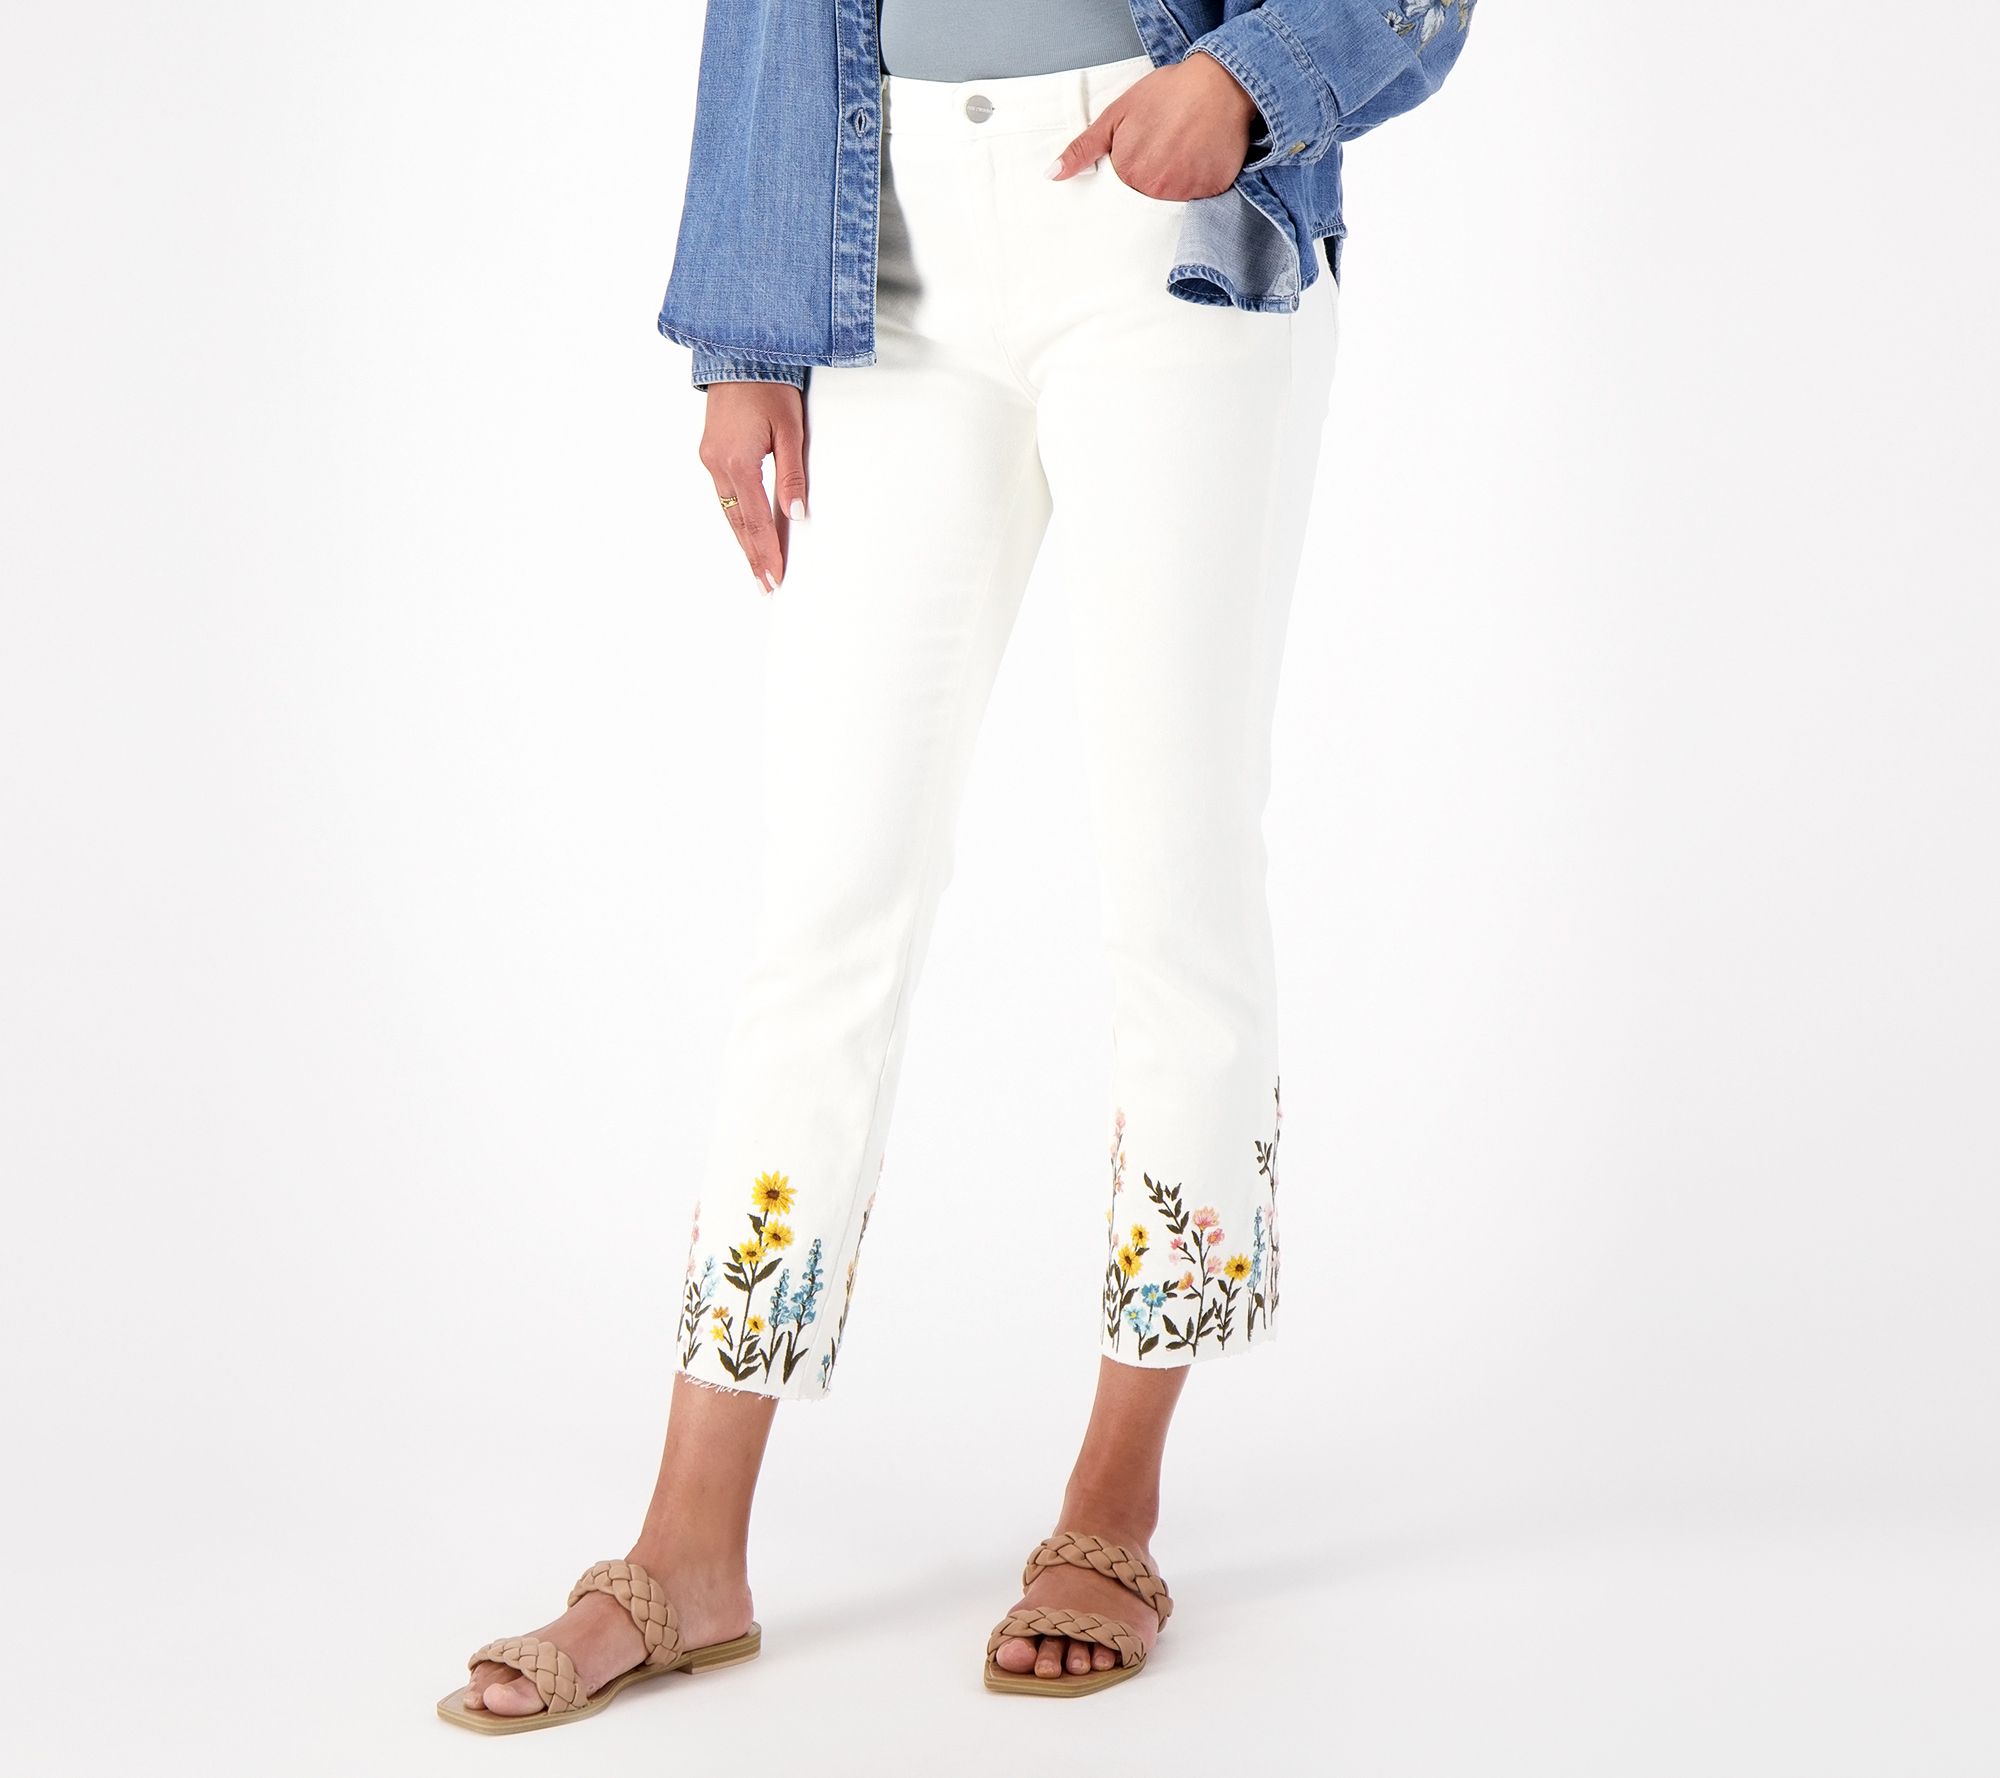 Driftwood Stretch Cotton Jogger- Mimosa 